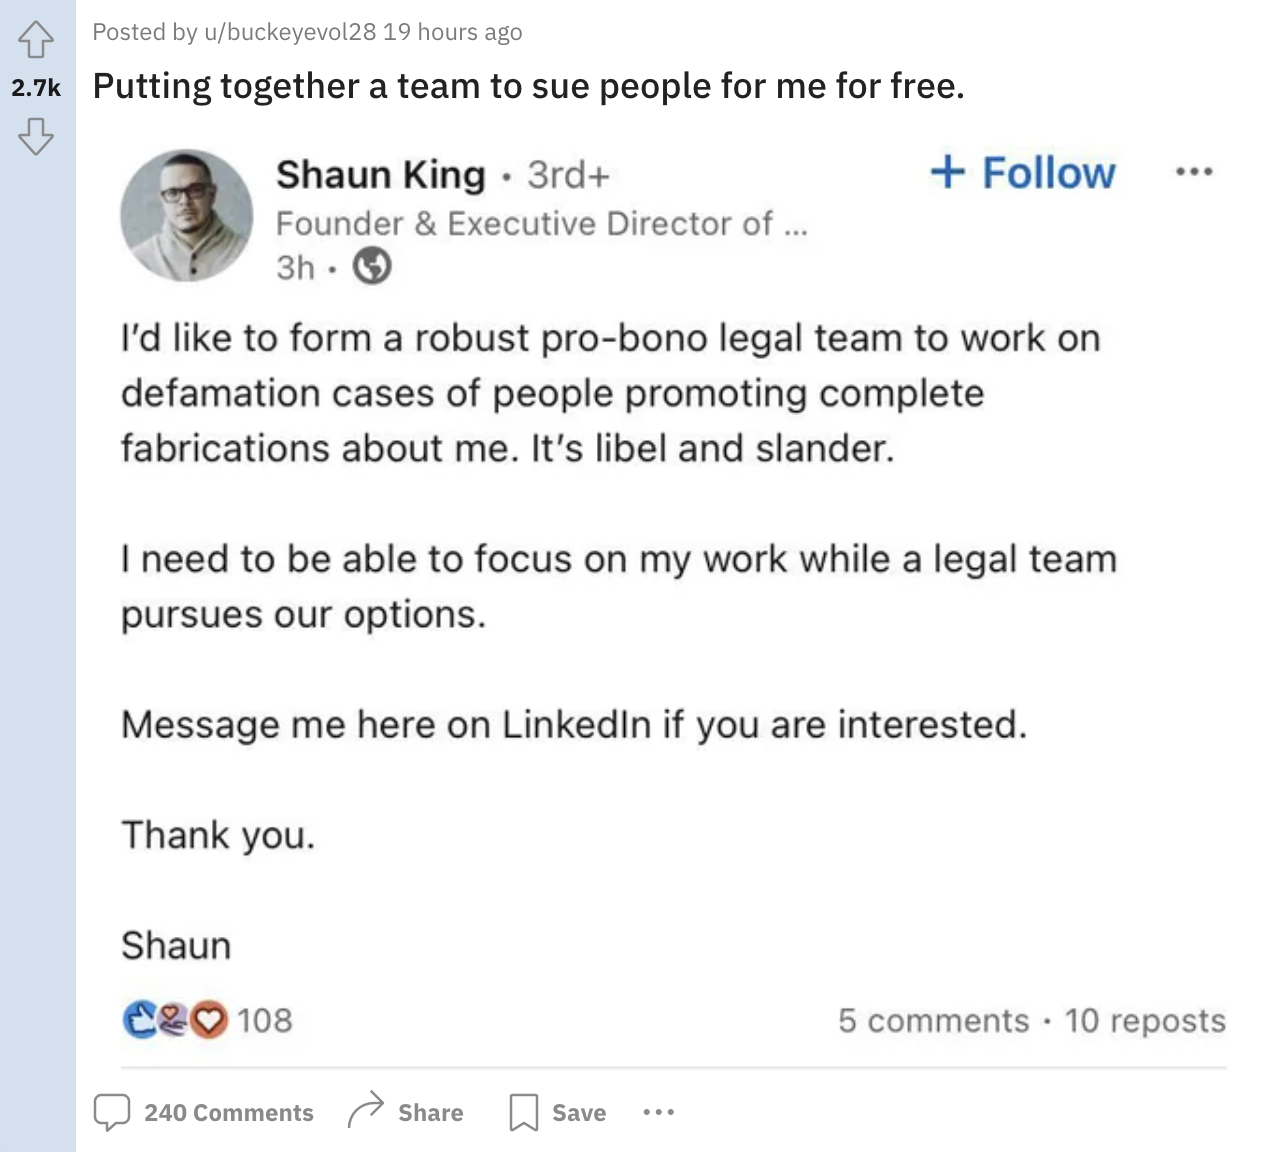 screenshot - Posted by ubuckeyevol28 19 hours ago Putting together a team to sue people for me for free. Shaun King 3rd Founder & Executive Director of ... 3h I'd to form a robust probono legal team to work on defamation cases of people promoting complete